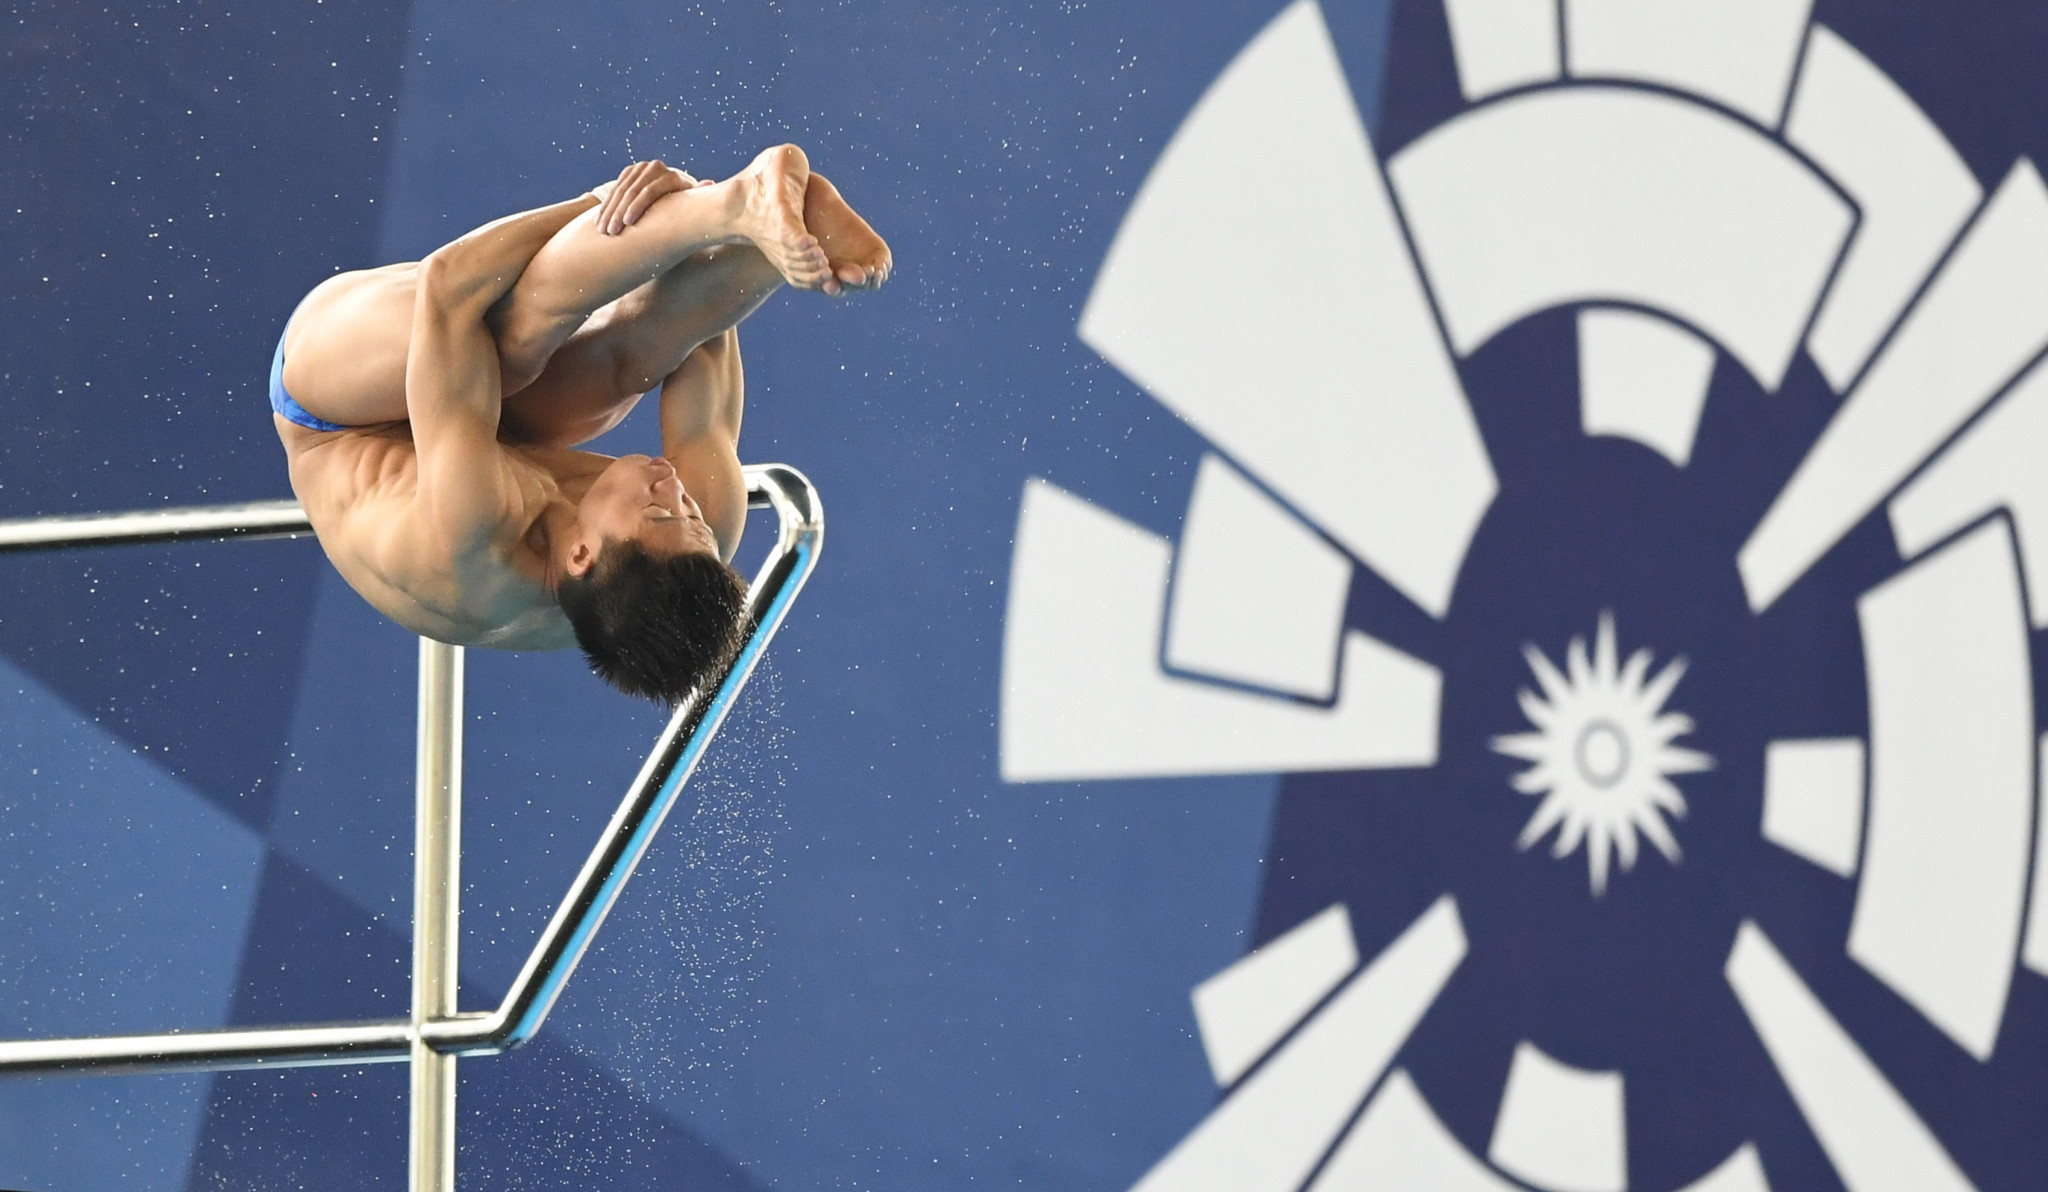 Yang Jian topped the men's 10 metres platform podium as China finished with a perfect 10 gold medals out of 10 in diving ©Getty Images